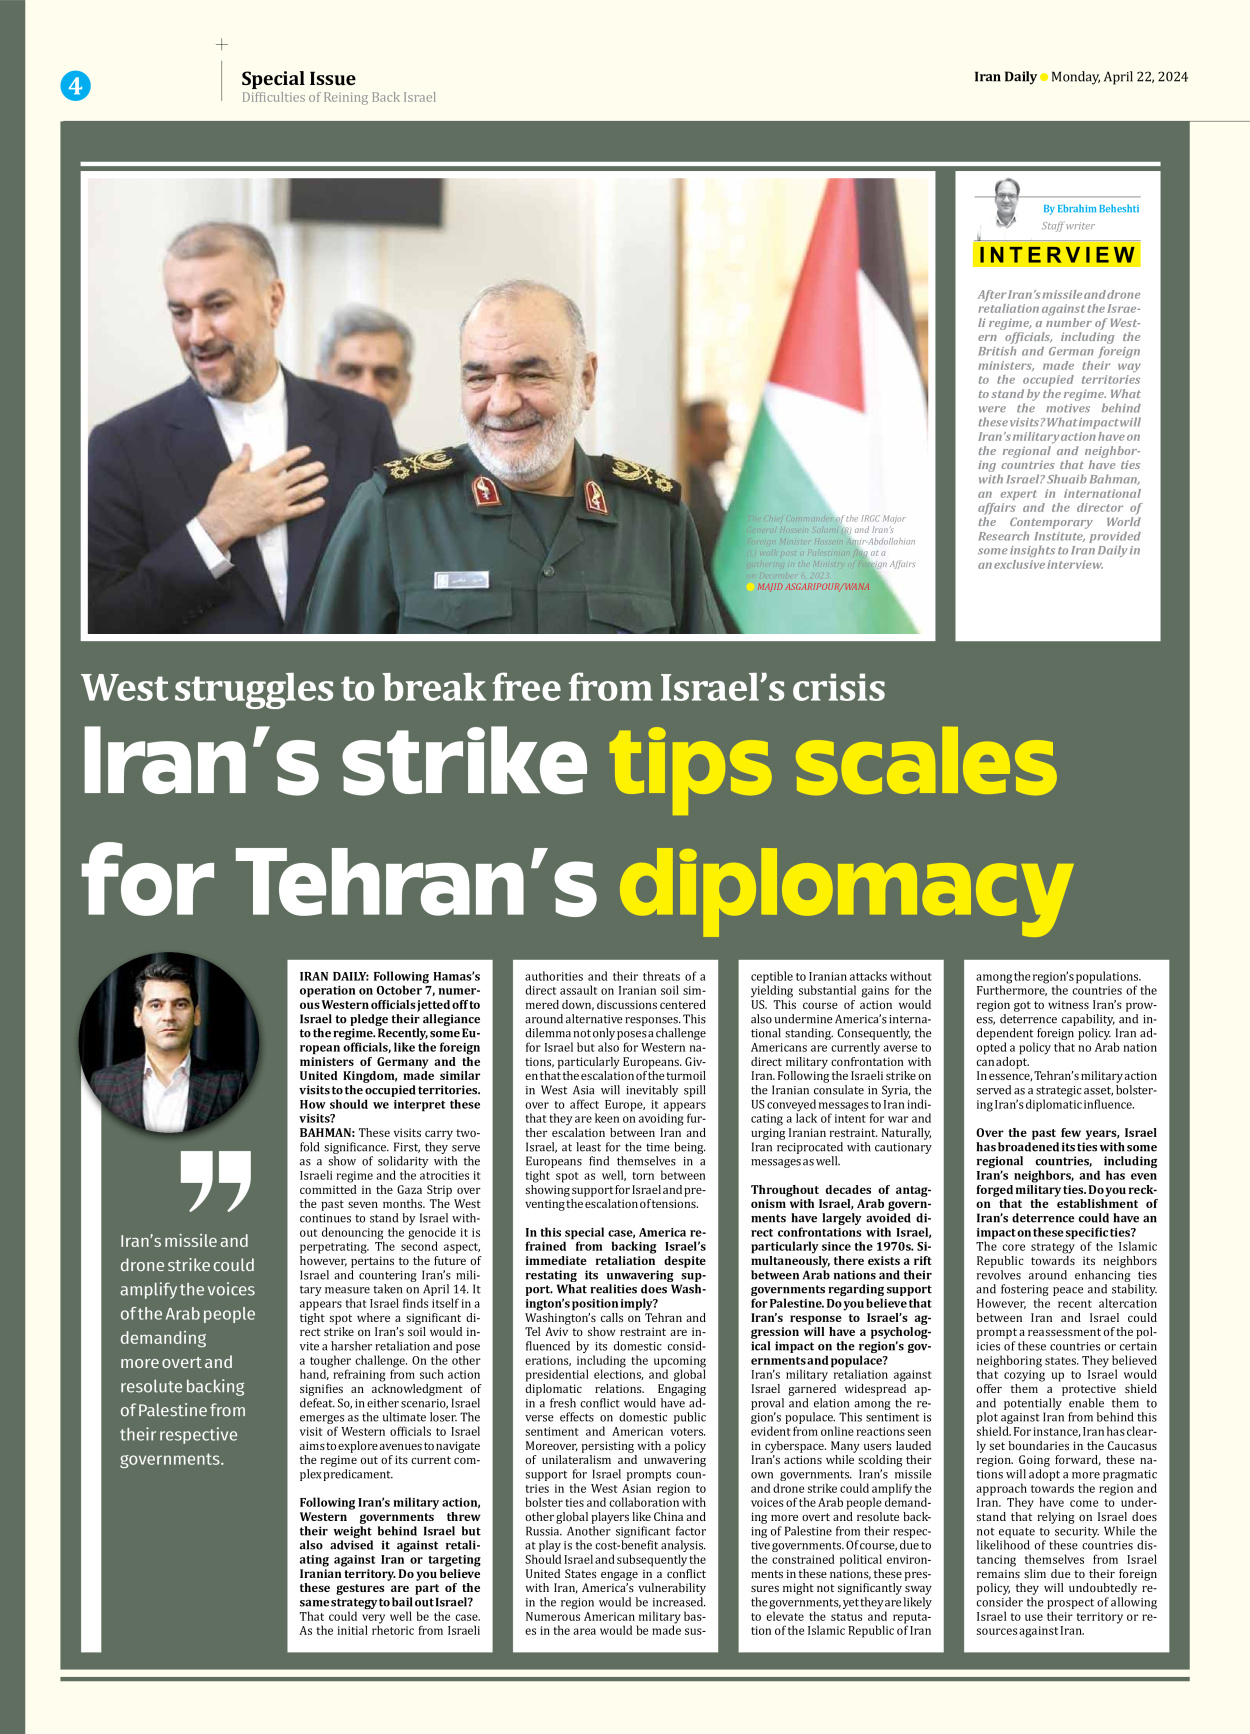 Iran Daily - Number Seven Thousand Five Hundred and Thirty Nine - 22 April 2024 - Page 4